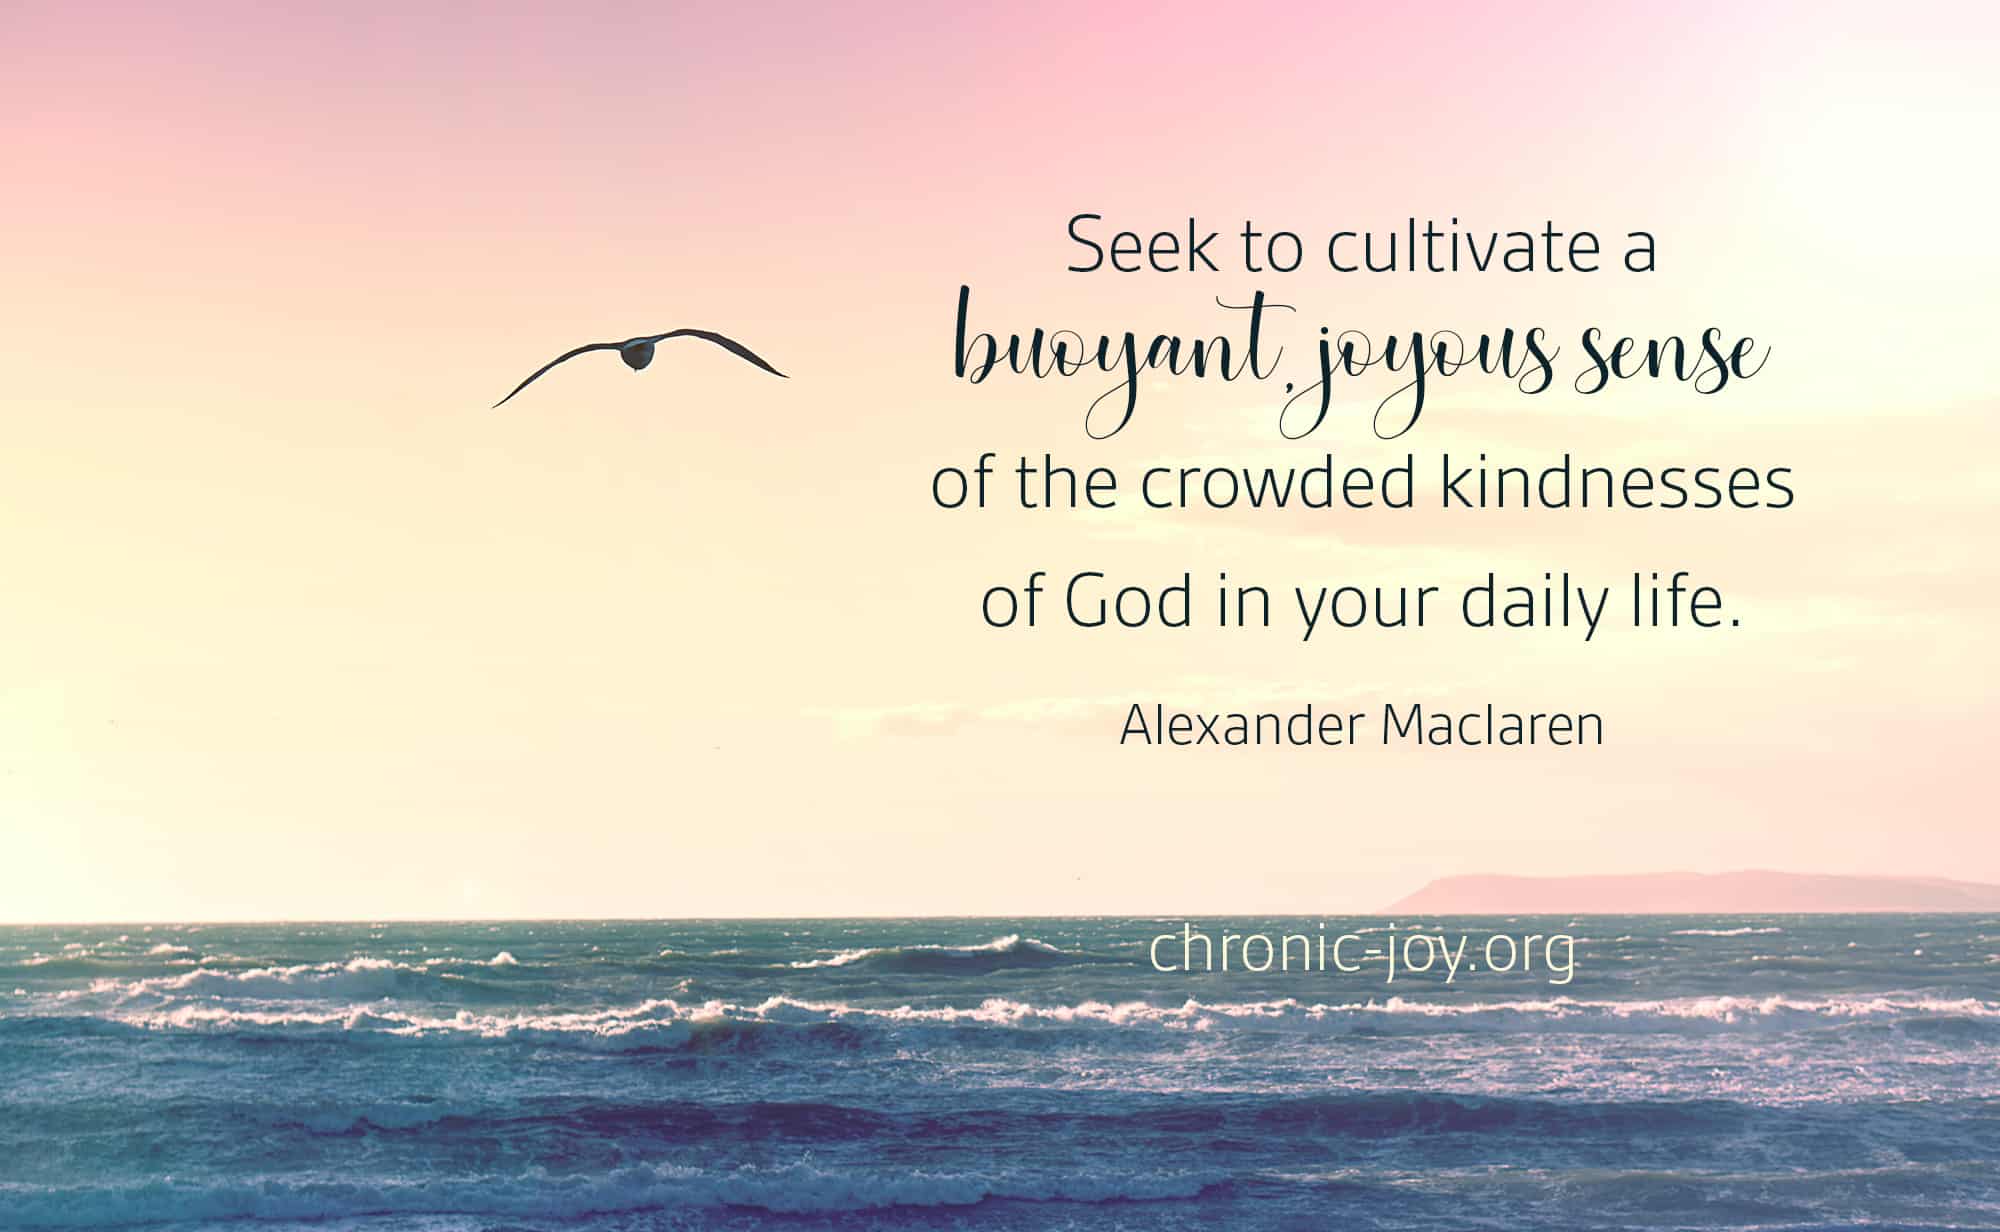 Seek to cultivate a buoyant, joyous sense of the crowded kindnesses of God